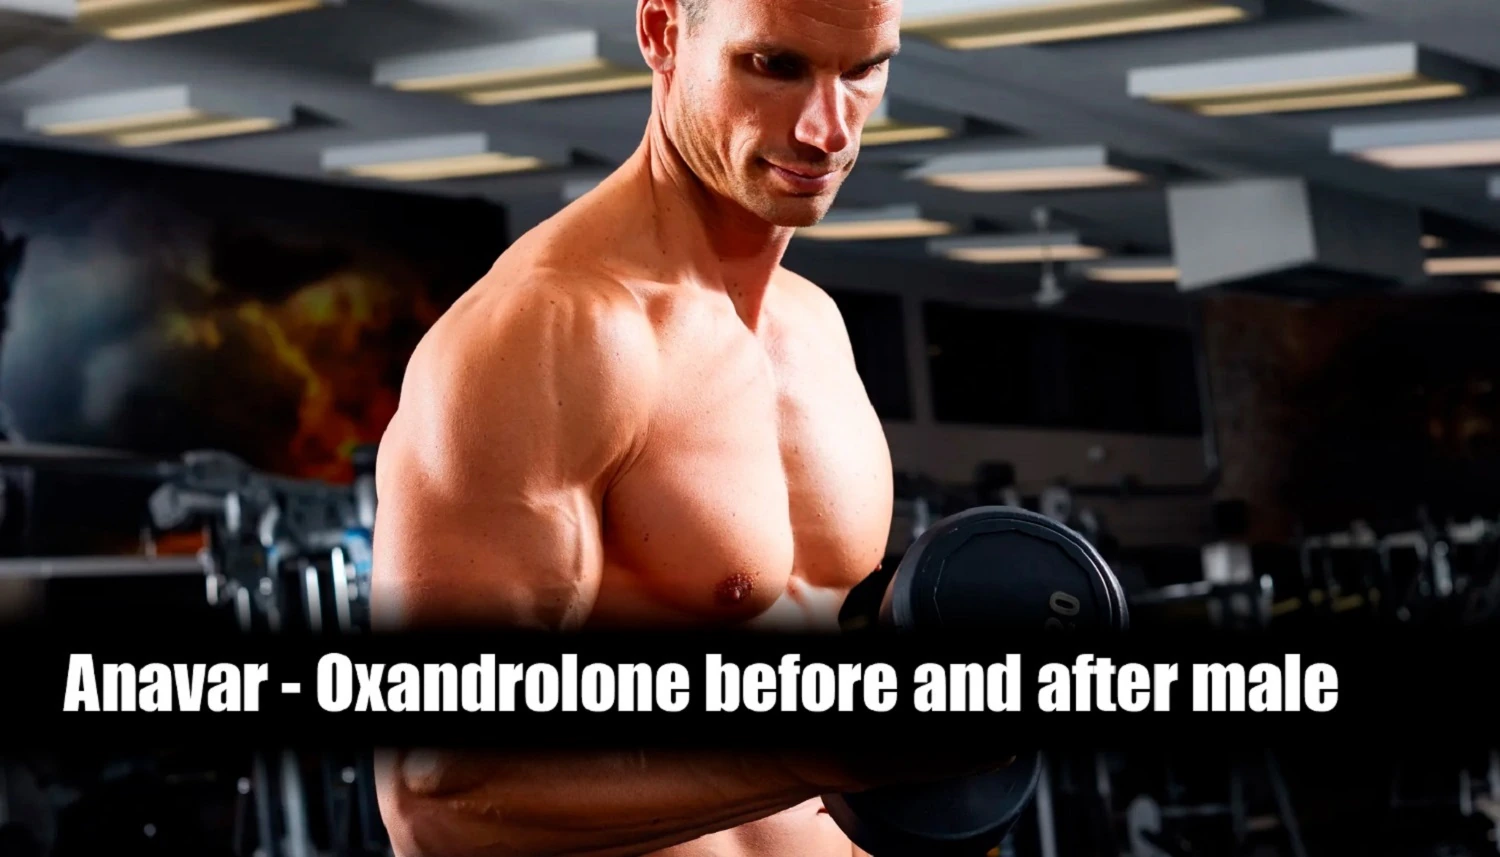  Oxandrolone before and after male